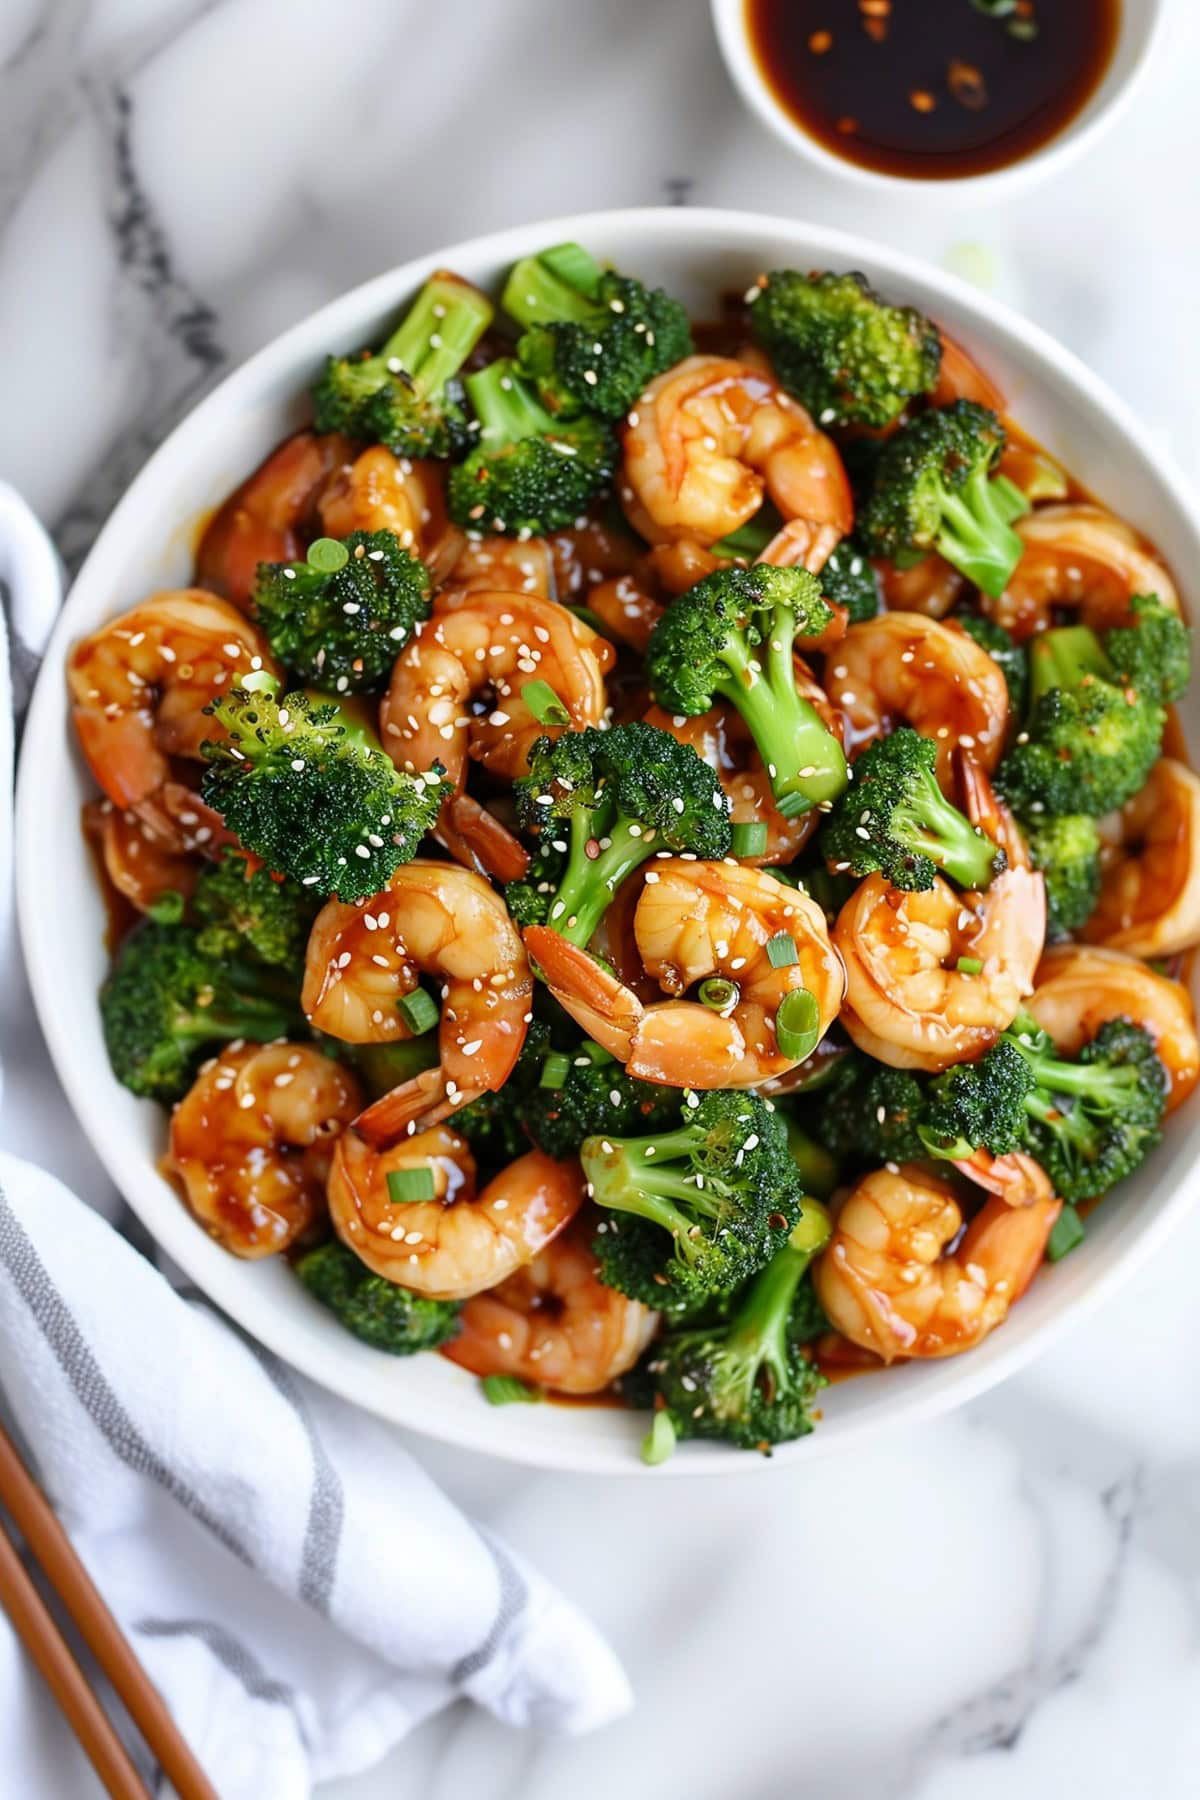 A bowl of homemade stir-fry shrimp and broccoli, a comforting dish that's perfect for busy weeknights or lazy weekends